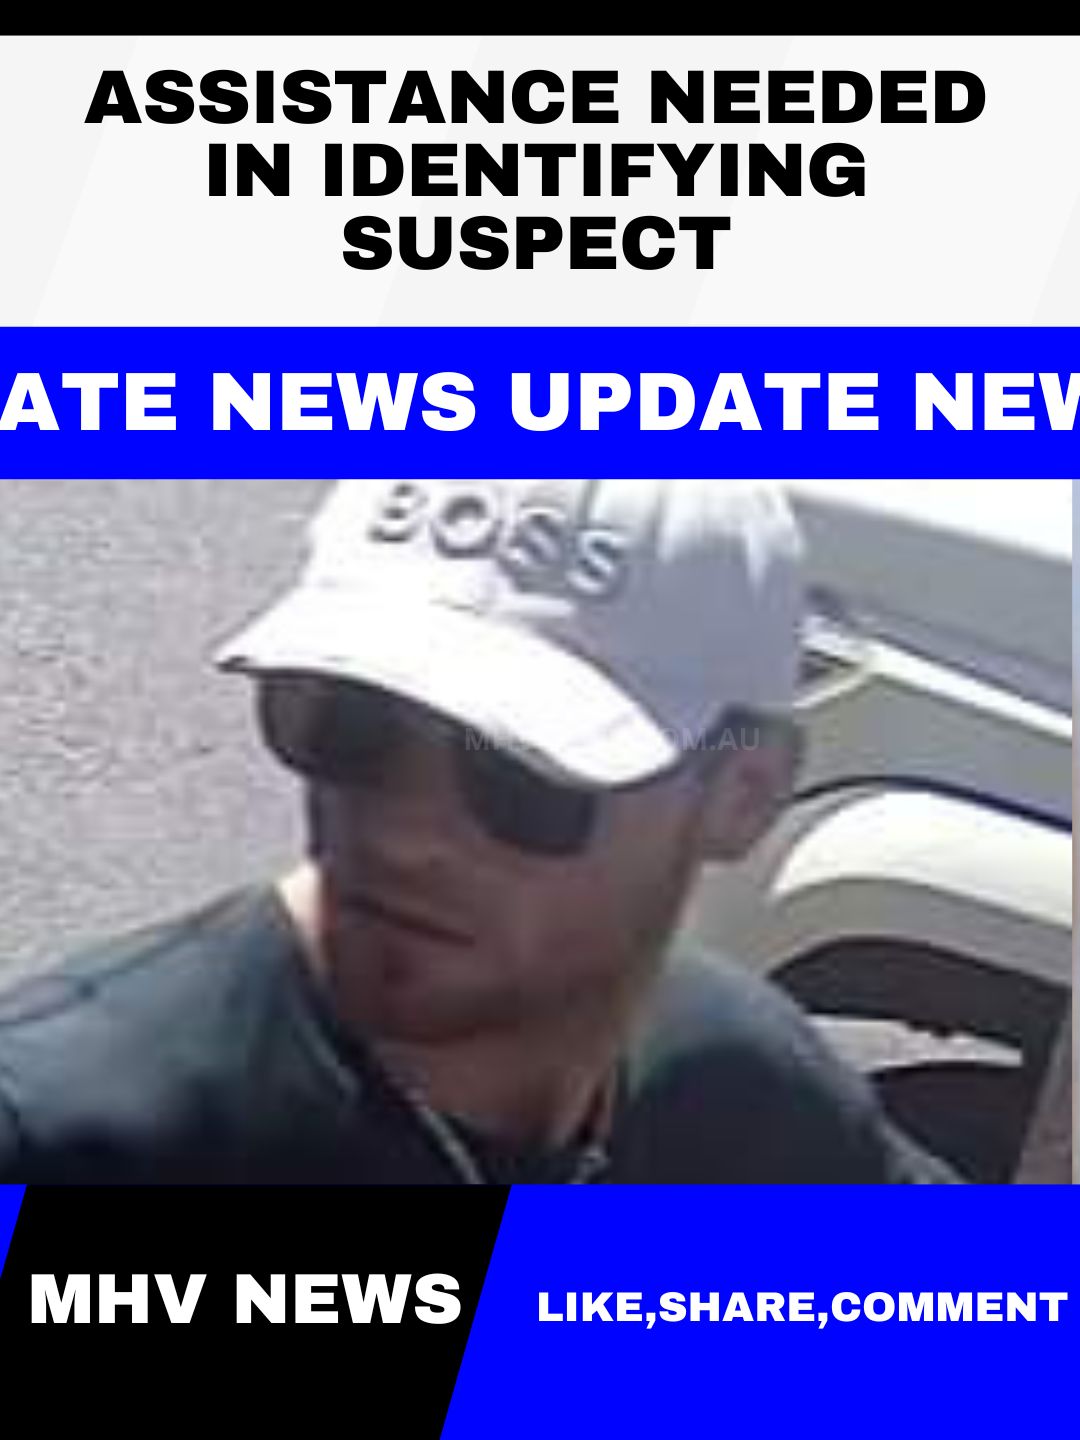 You are currently viewing Assistance Needed in Identifying Suspect.